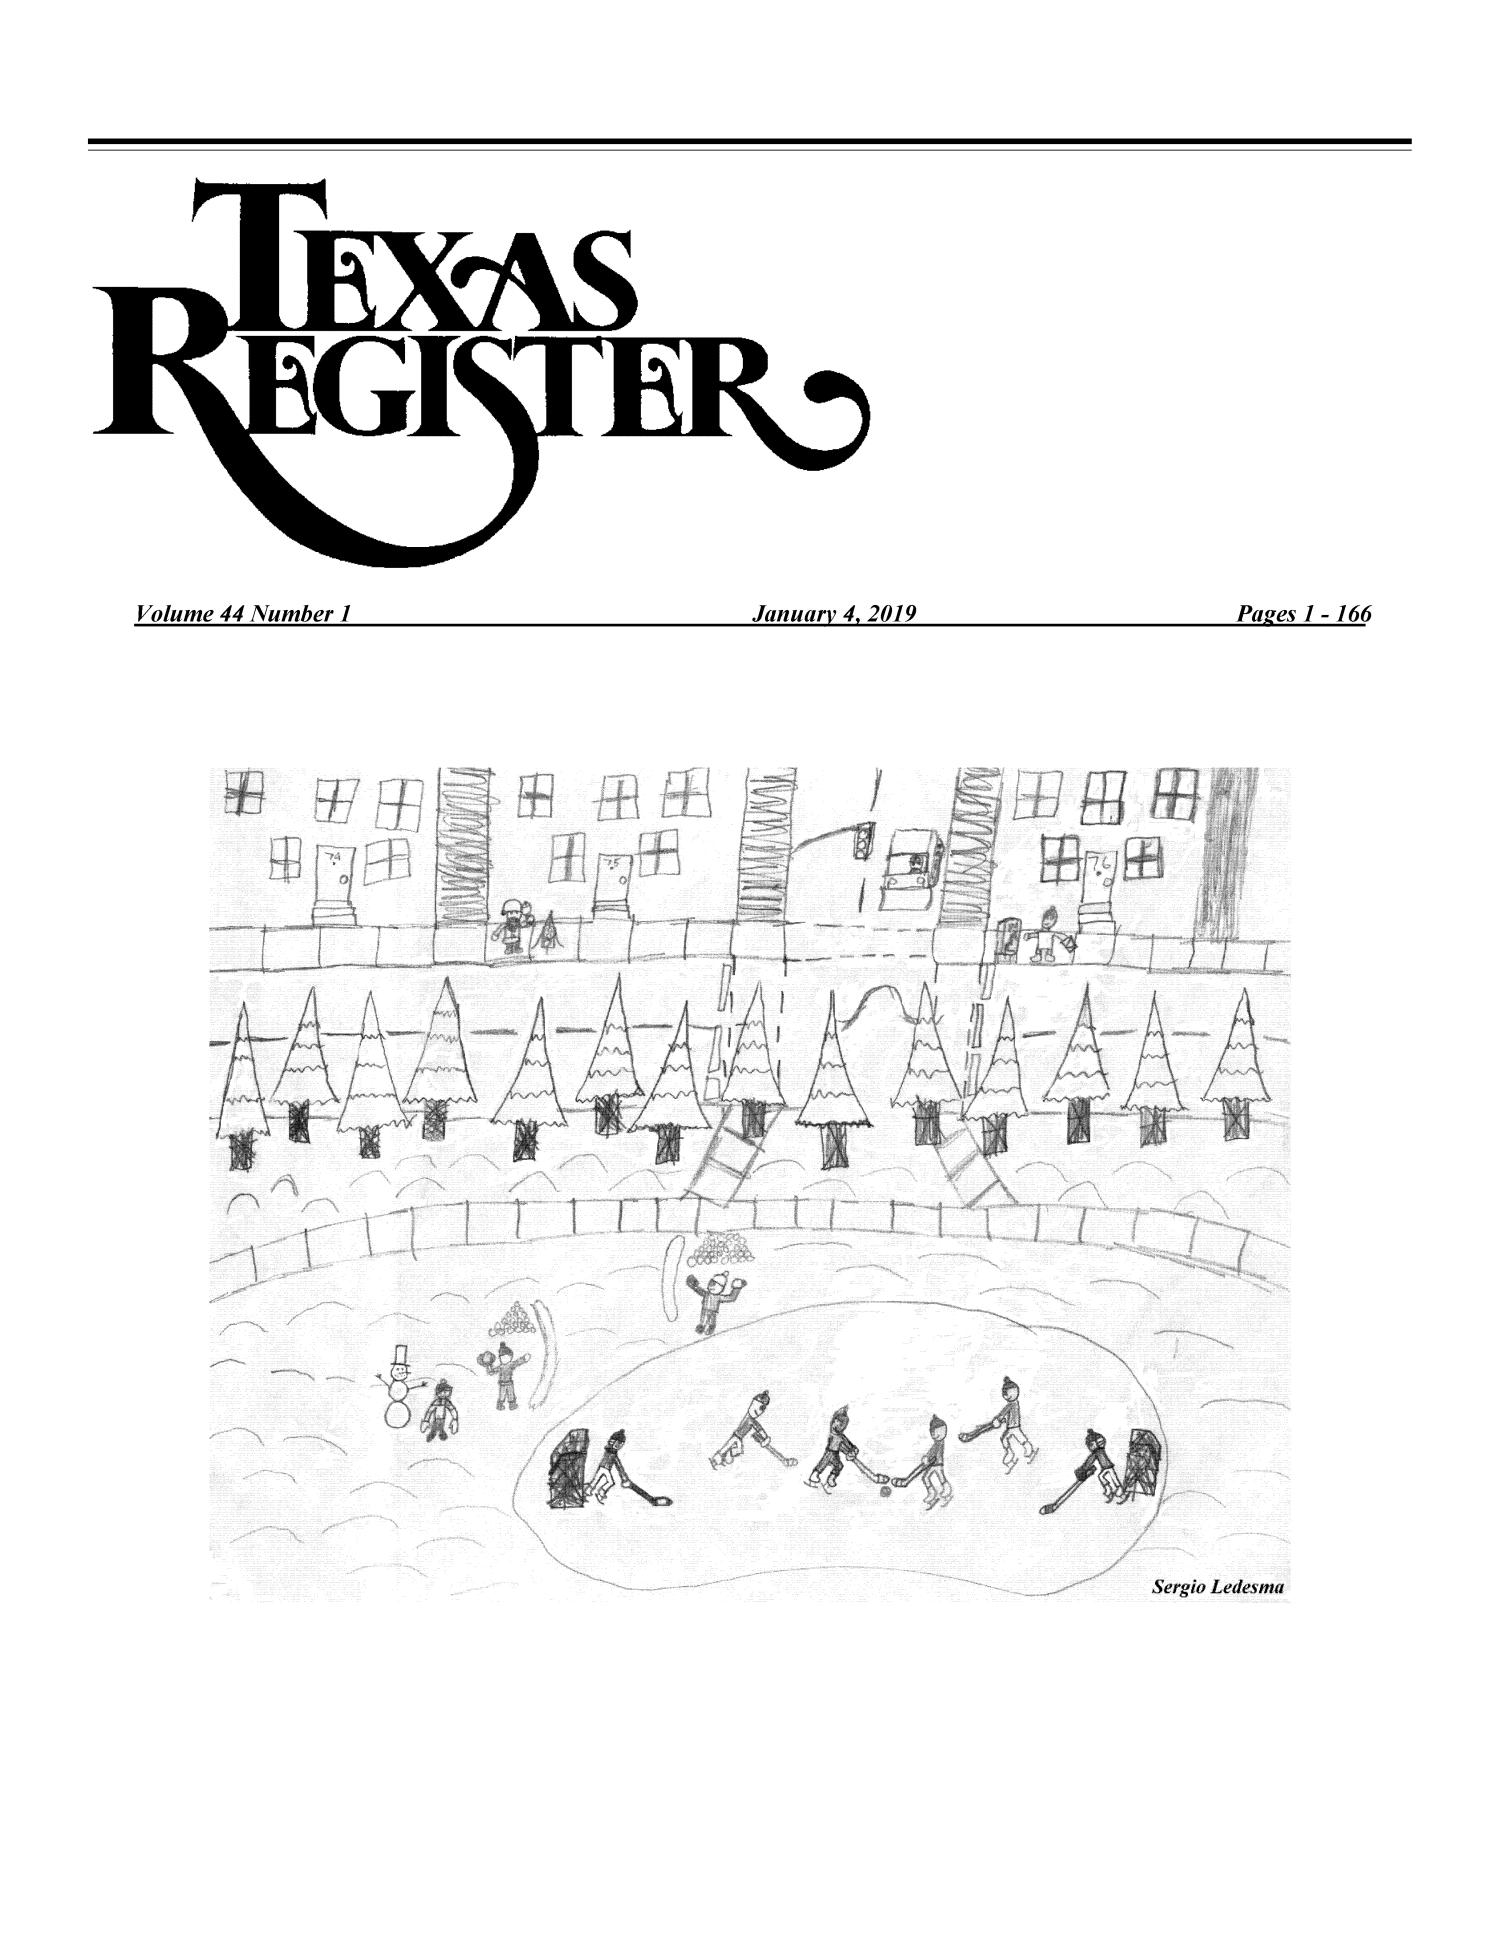 Texas Register, Volume 44, Number 1, Pages 1-166, January 4, 2019
                                                
                                                    Title Page
                                                